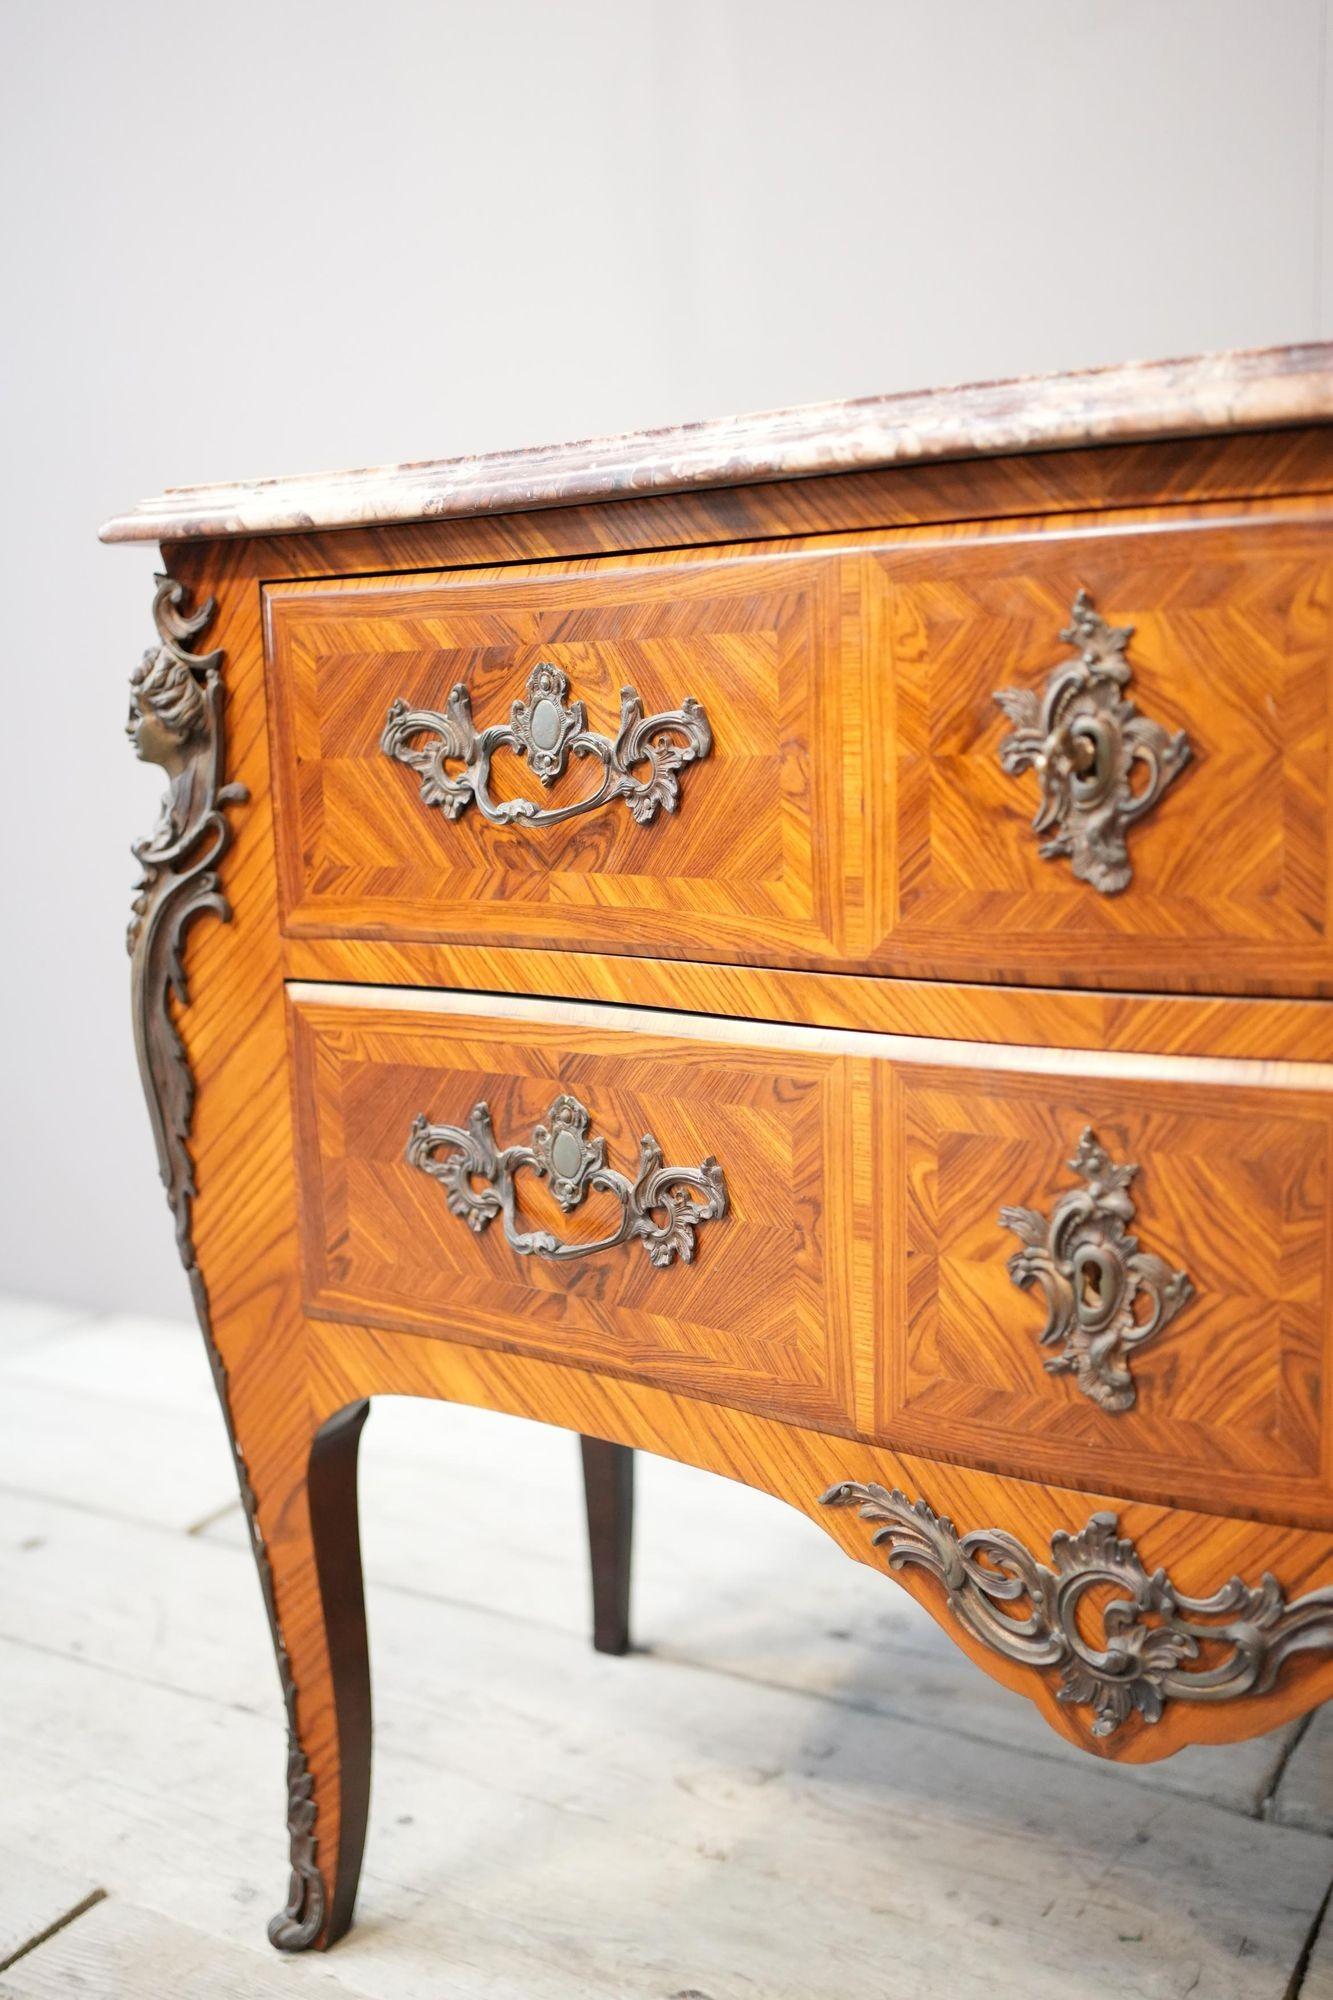 This is a truly exceptional French kingwood marquetry chest of drawers. Its quality is incredible as is its condition. Very clean and totally original. The bronze cast decoration is very fine and the red marble top sets the piece off perfectly. The